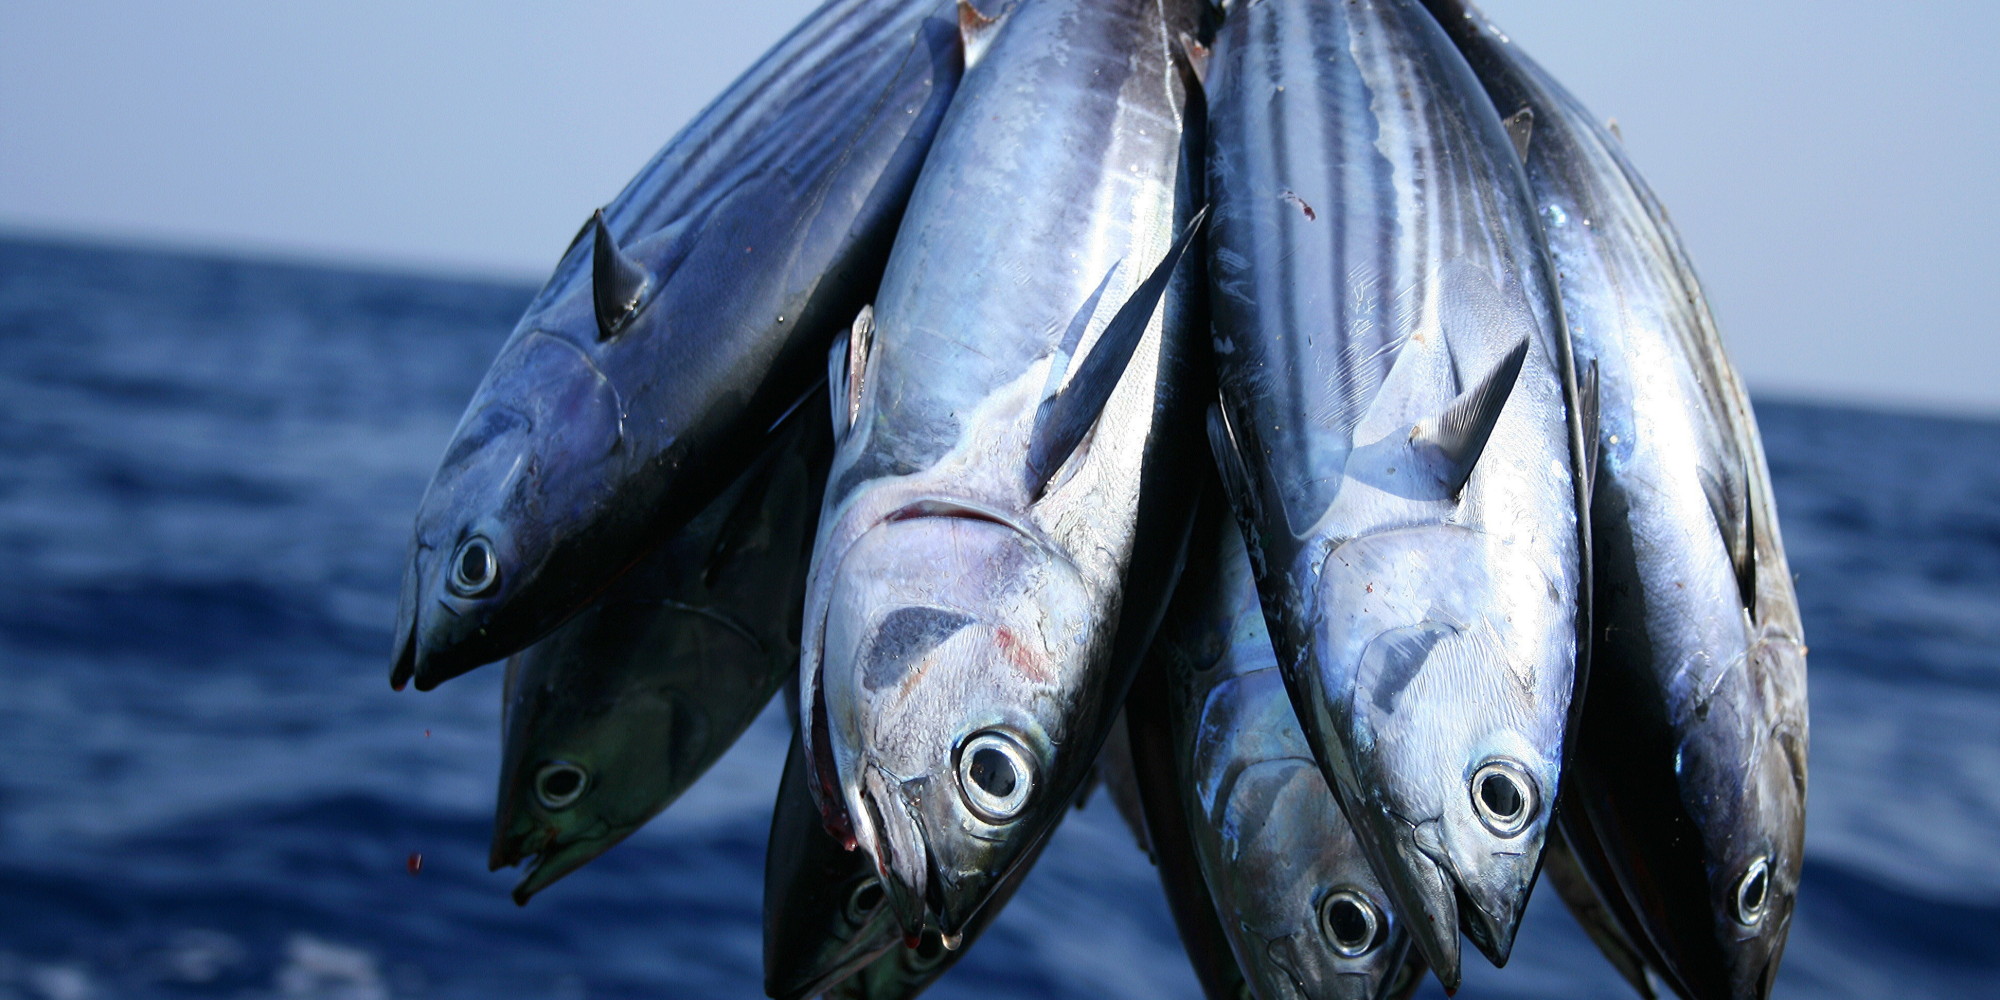 sustainable-fisheries-onehealth-of-future-food-huffpost